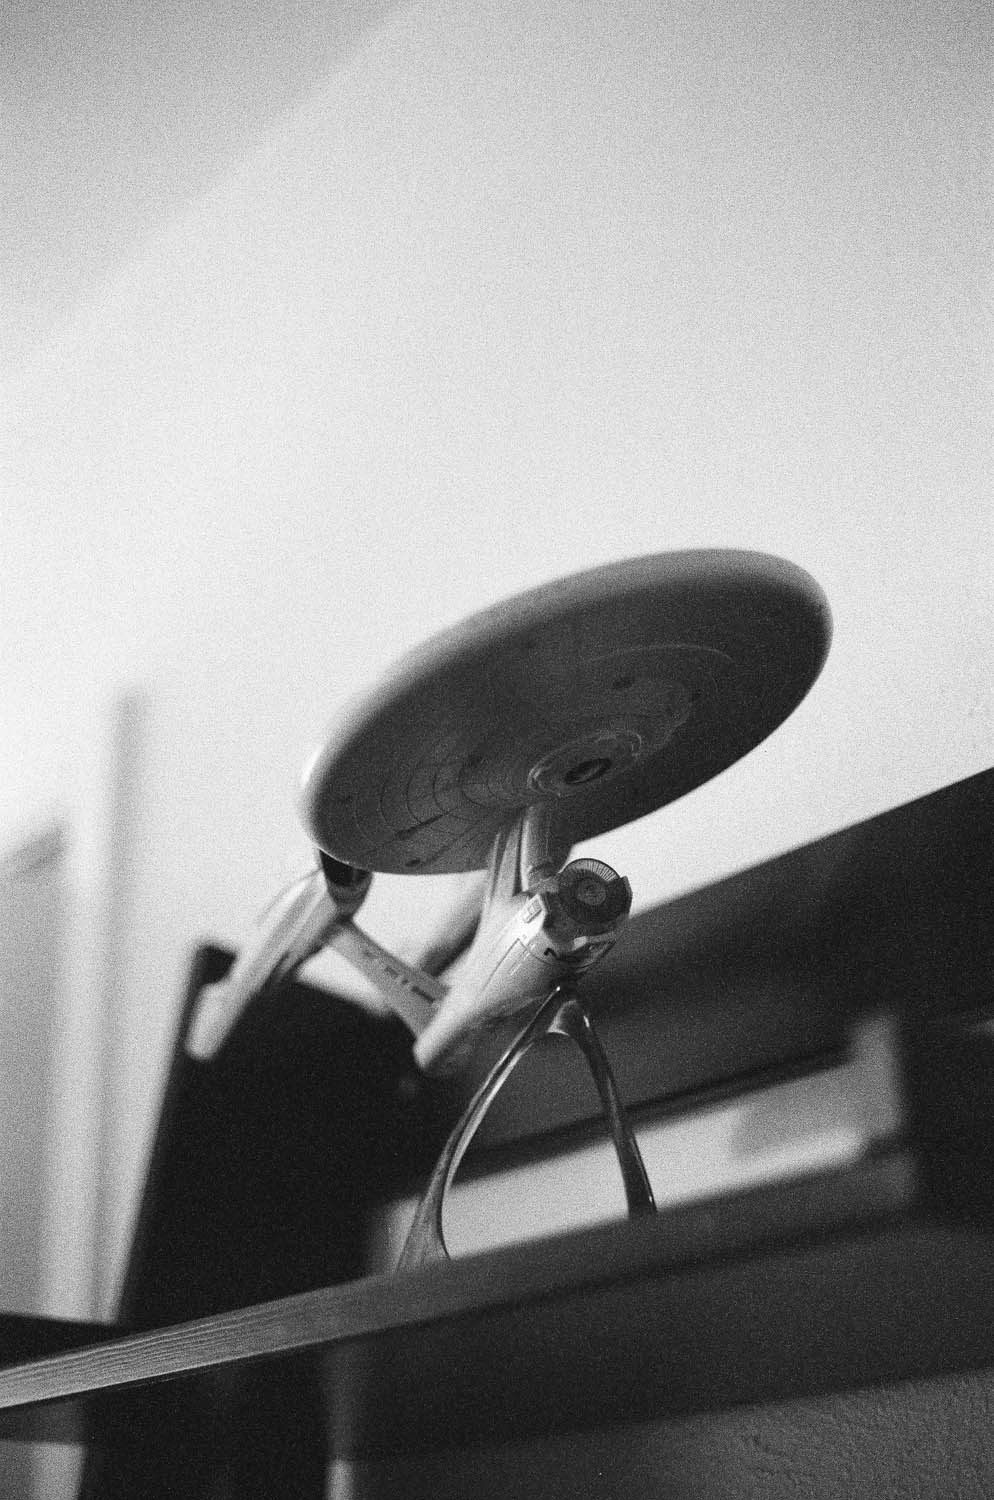 A shot of an Enterprise model. Shot at 3200, and developed at 3200 by the Darkroom.